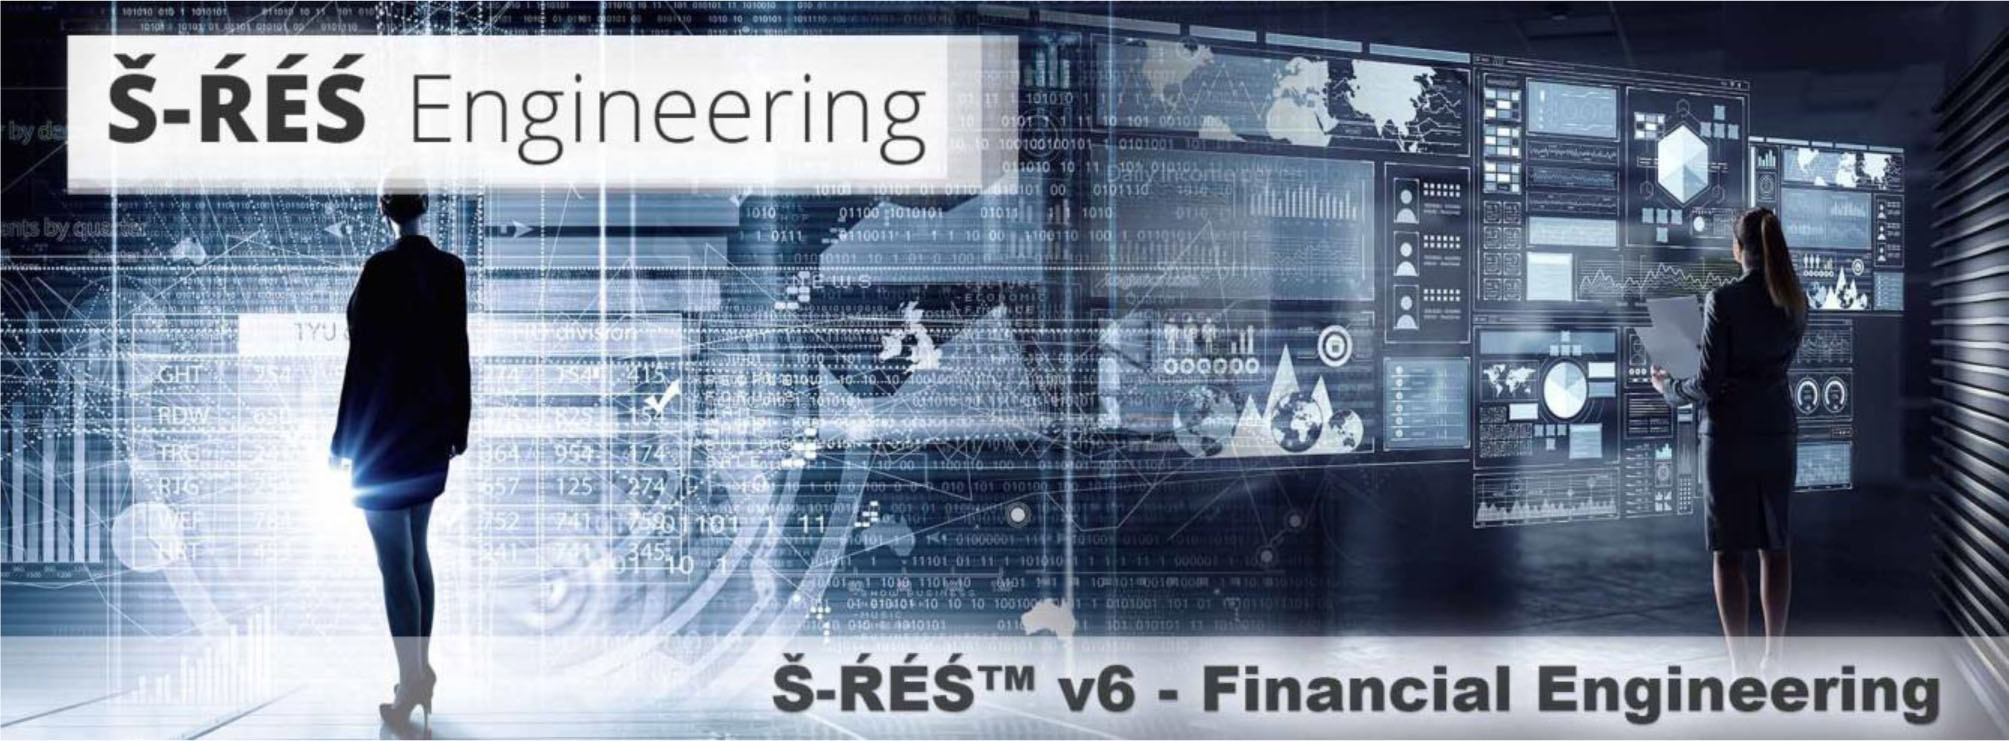 S-RES Engineering